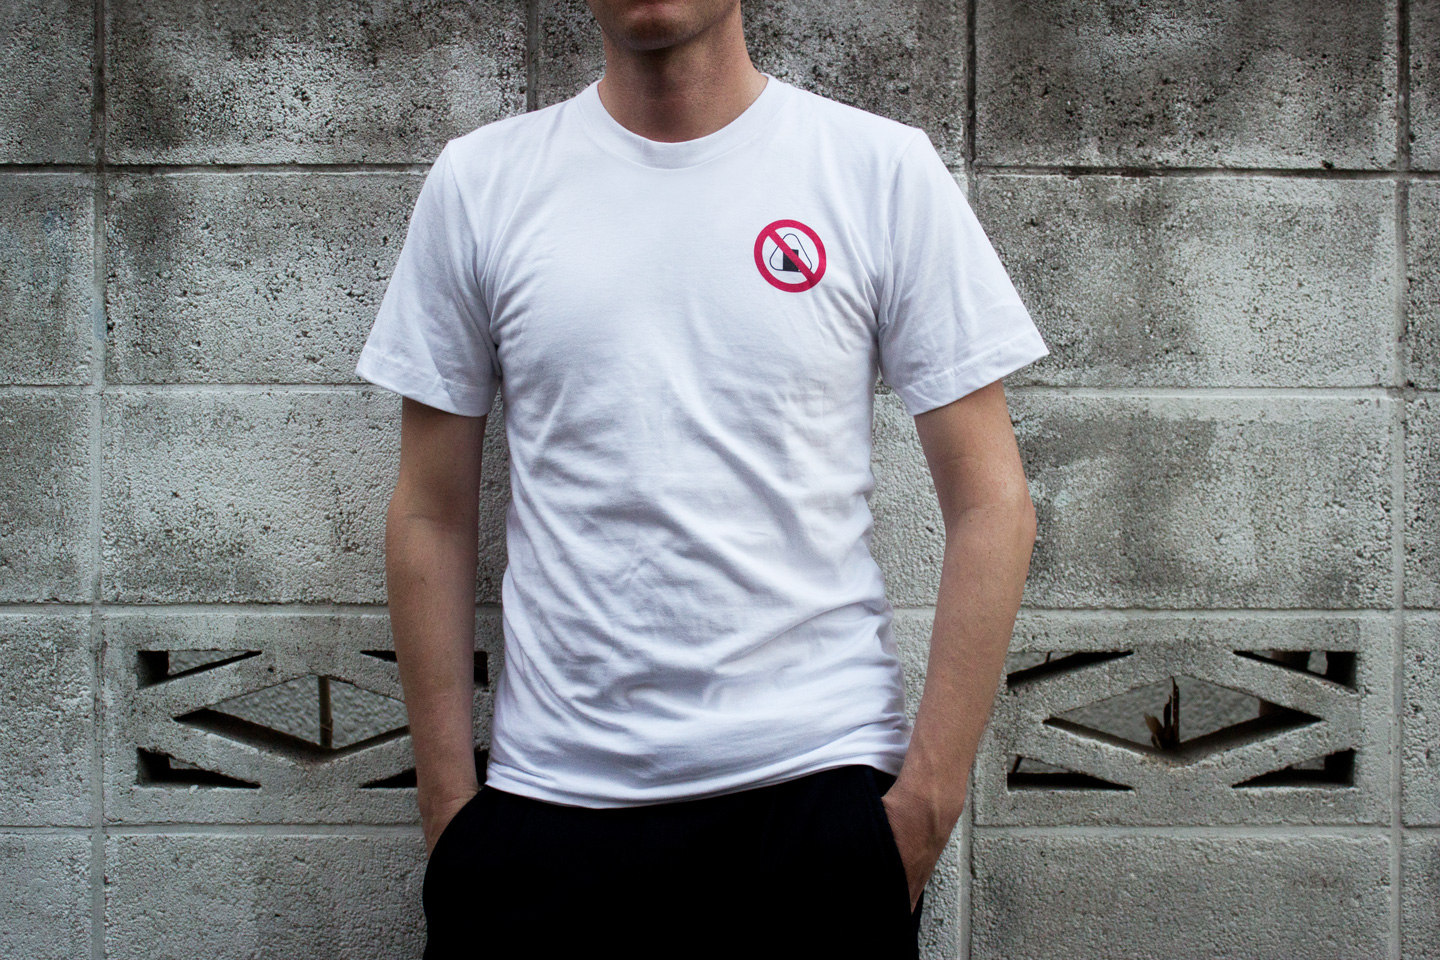 Tokyo Signs™ - Products inspired by the streets of Tokyo - Onigiri Busters T-shirt